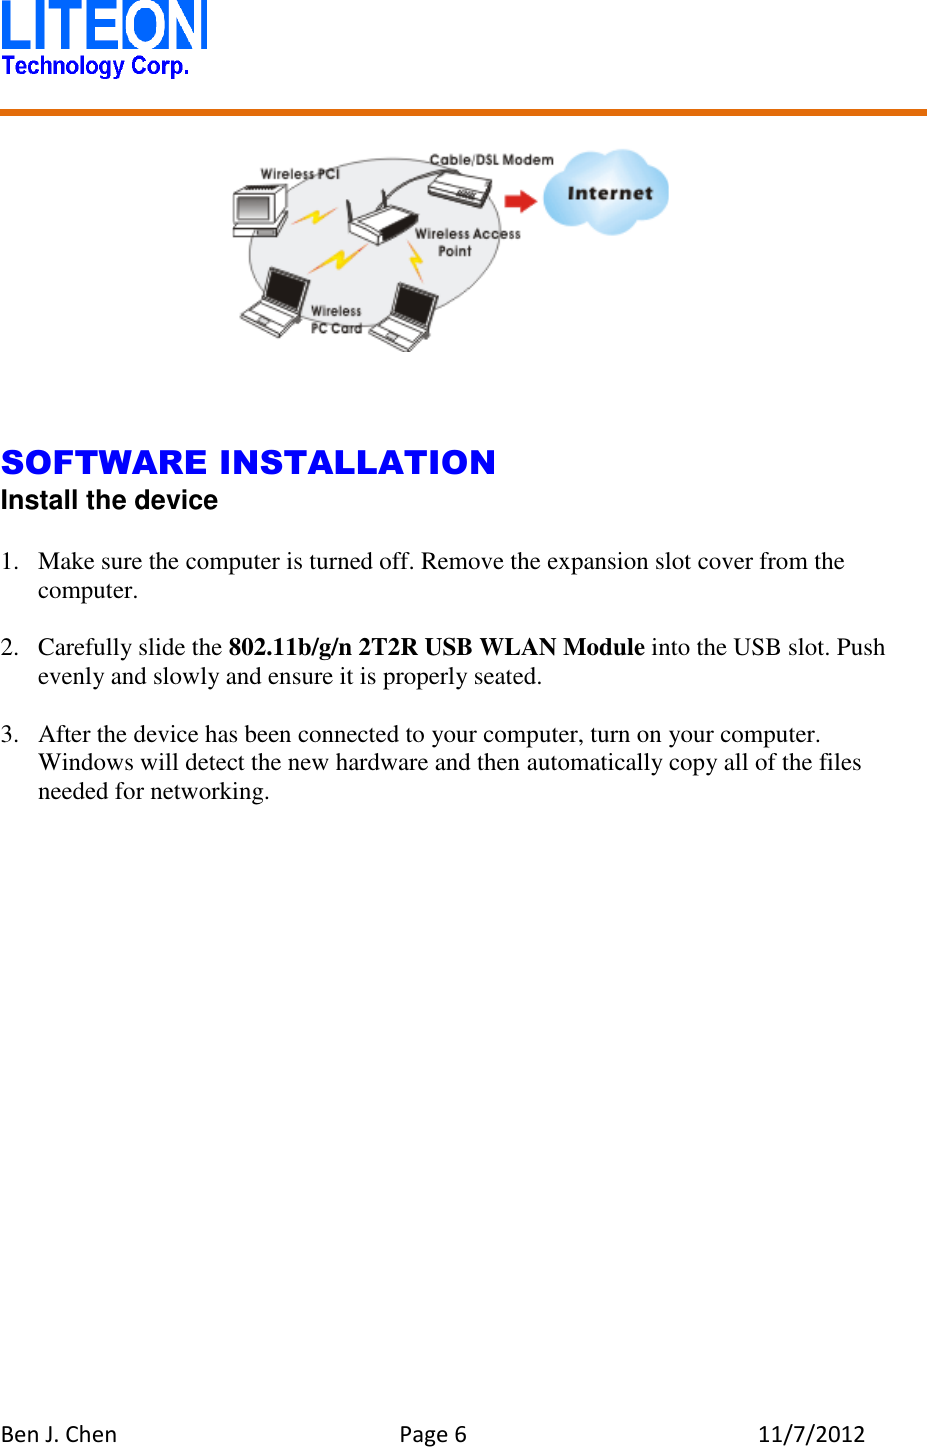   Ben J. Chen  Page 6  11/7/2012         SOFTWARE INSTALLATION Install the device  1. Make sure the computer is turned off. Remove the expansion slot cover from the computer.  2. Carefully slide the 802.11b/g/n 2T2R USB WLAN Module into the USB slot. Push evenly and slowly and ensure it is properly seated.  3. After the device has been connected to your computer, turn on your computer. Windows will detect the new hardware and then automatically copy all of the files needed for networking.  